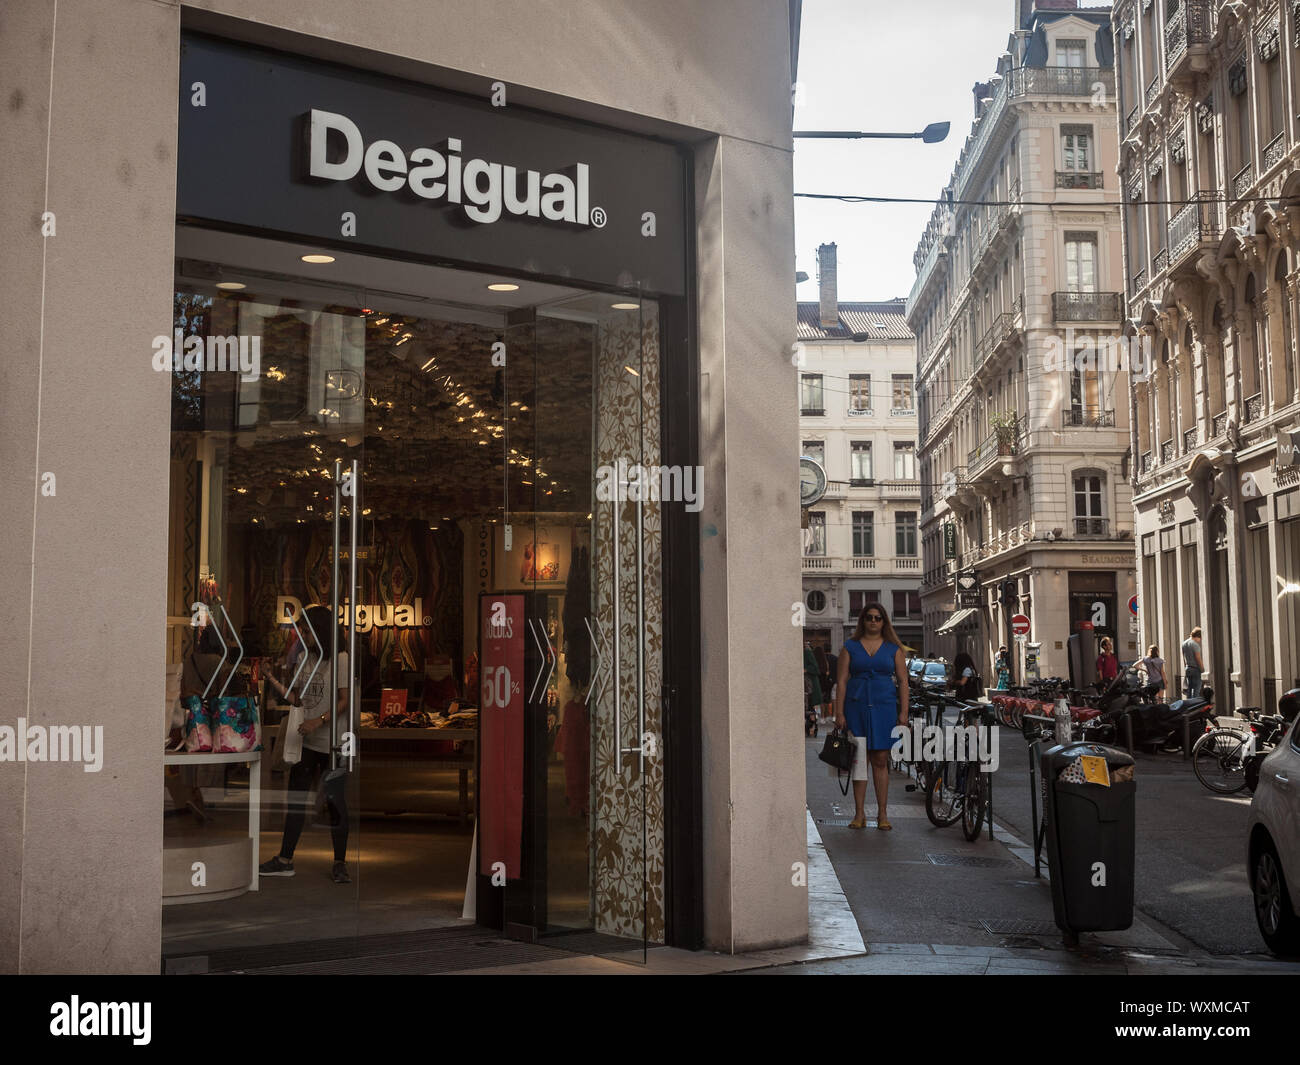 LYON, FRANCE - JULY 13, 2019: Desigual logo in front of their main boutique  for Lyon. Desigual is a Spanish fashion designer and retailer specialized  Stock Photo - Alamy